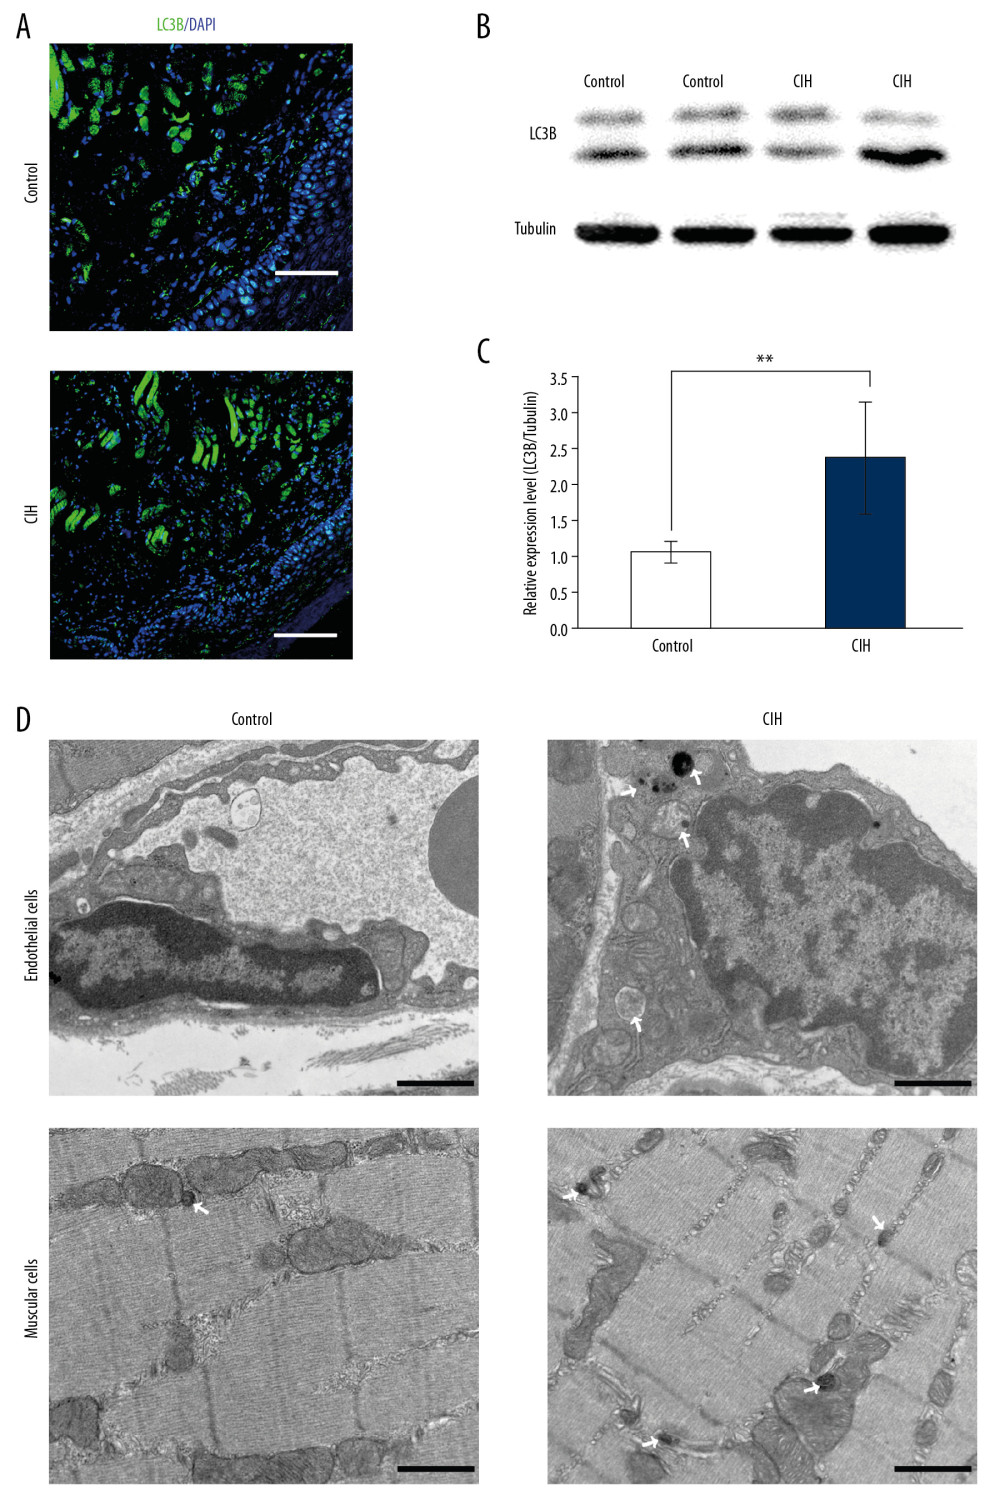 Autophagy was induced to protect CIH-induced dysfunction. (A) Immunohistochemistry staining of LC3B on the soft palate of the control group and the CIH group. The LC3B positive cells were located in the mucosa and muscle layers. Scale bar is 100 μm. (B) Western blotting of LC3B expression in the control group and the CIH group. (C) The bar showing the relative expression level. The relative protein expression was calculated based on the control group which was considered equal to 1. All values are expressed as mean±standard deviation. * P<0.05. (D) Transmission electron microscopy depicting ultras structures of autophagolysosomes in endothelial and muscular cells of the soft plate exposed to normal or chronic intermittent hypoxia. Autophagic vacuoles are highlighted by arrows. Bar scale 1 μm.